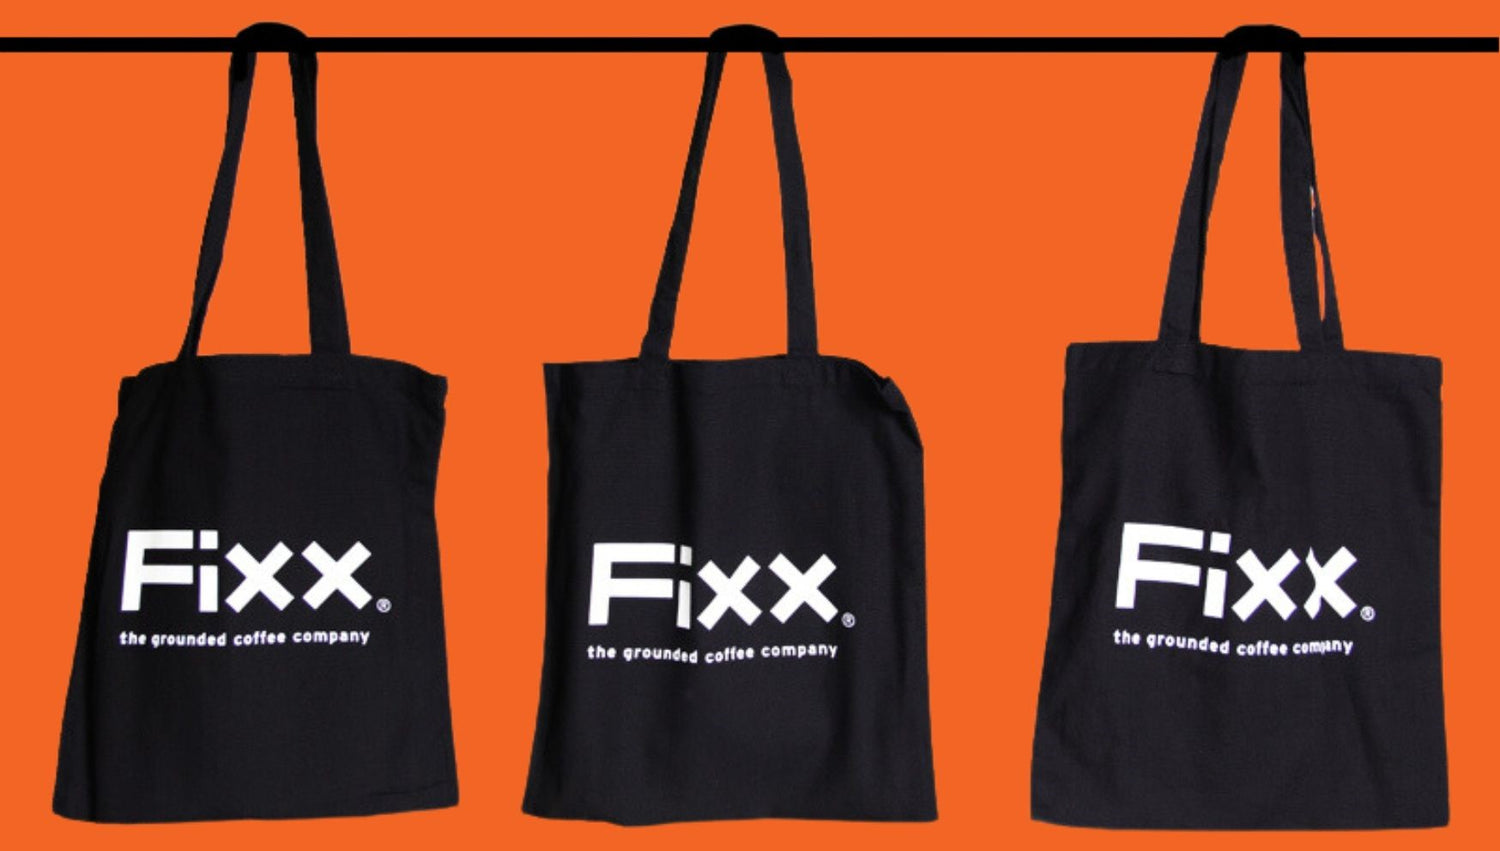 FiXX Coffee tote bags ready for gift shopping